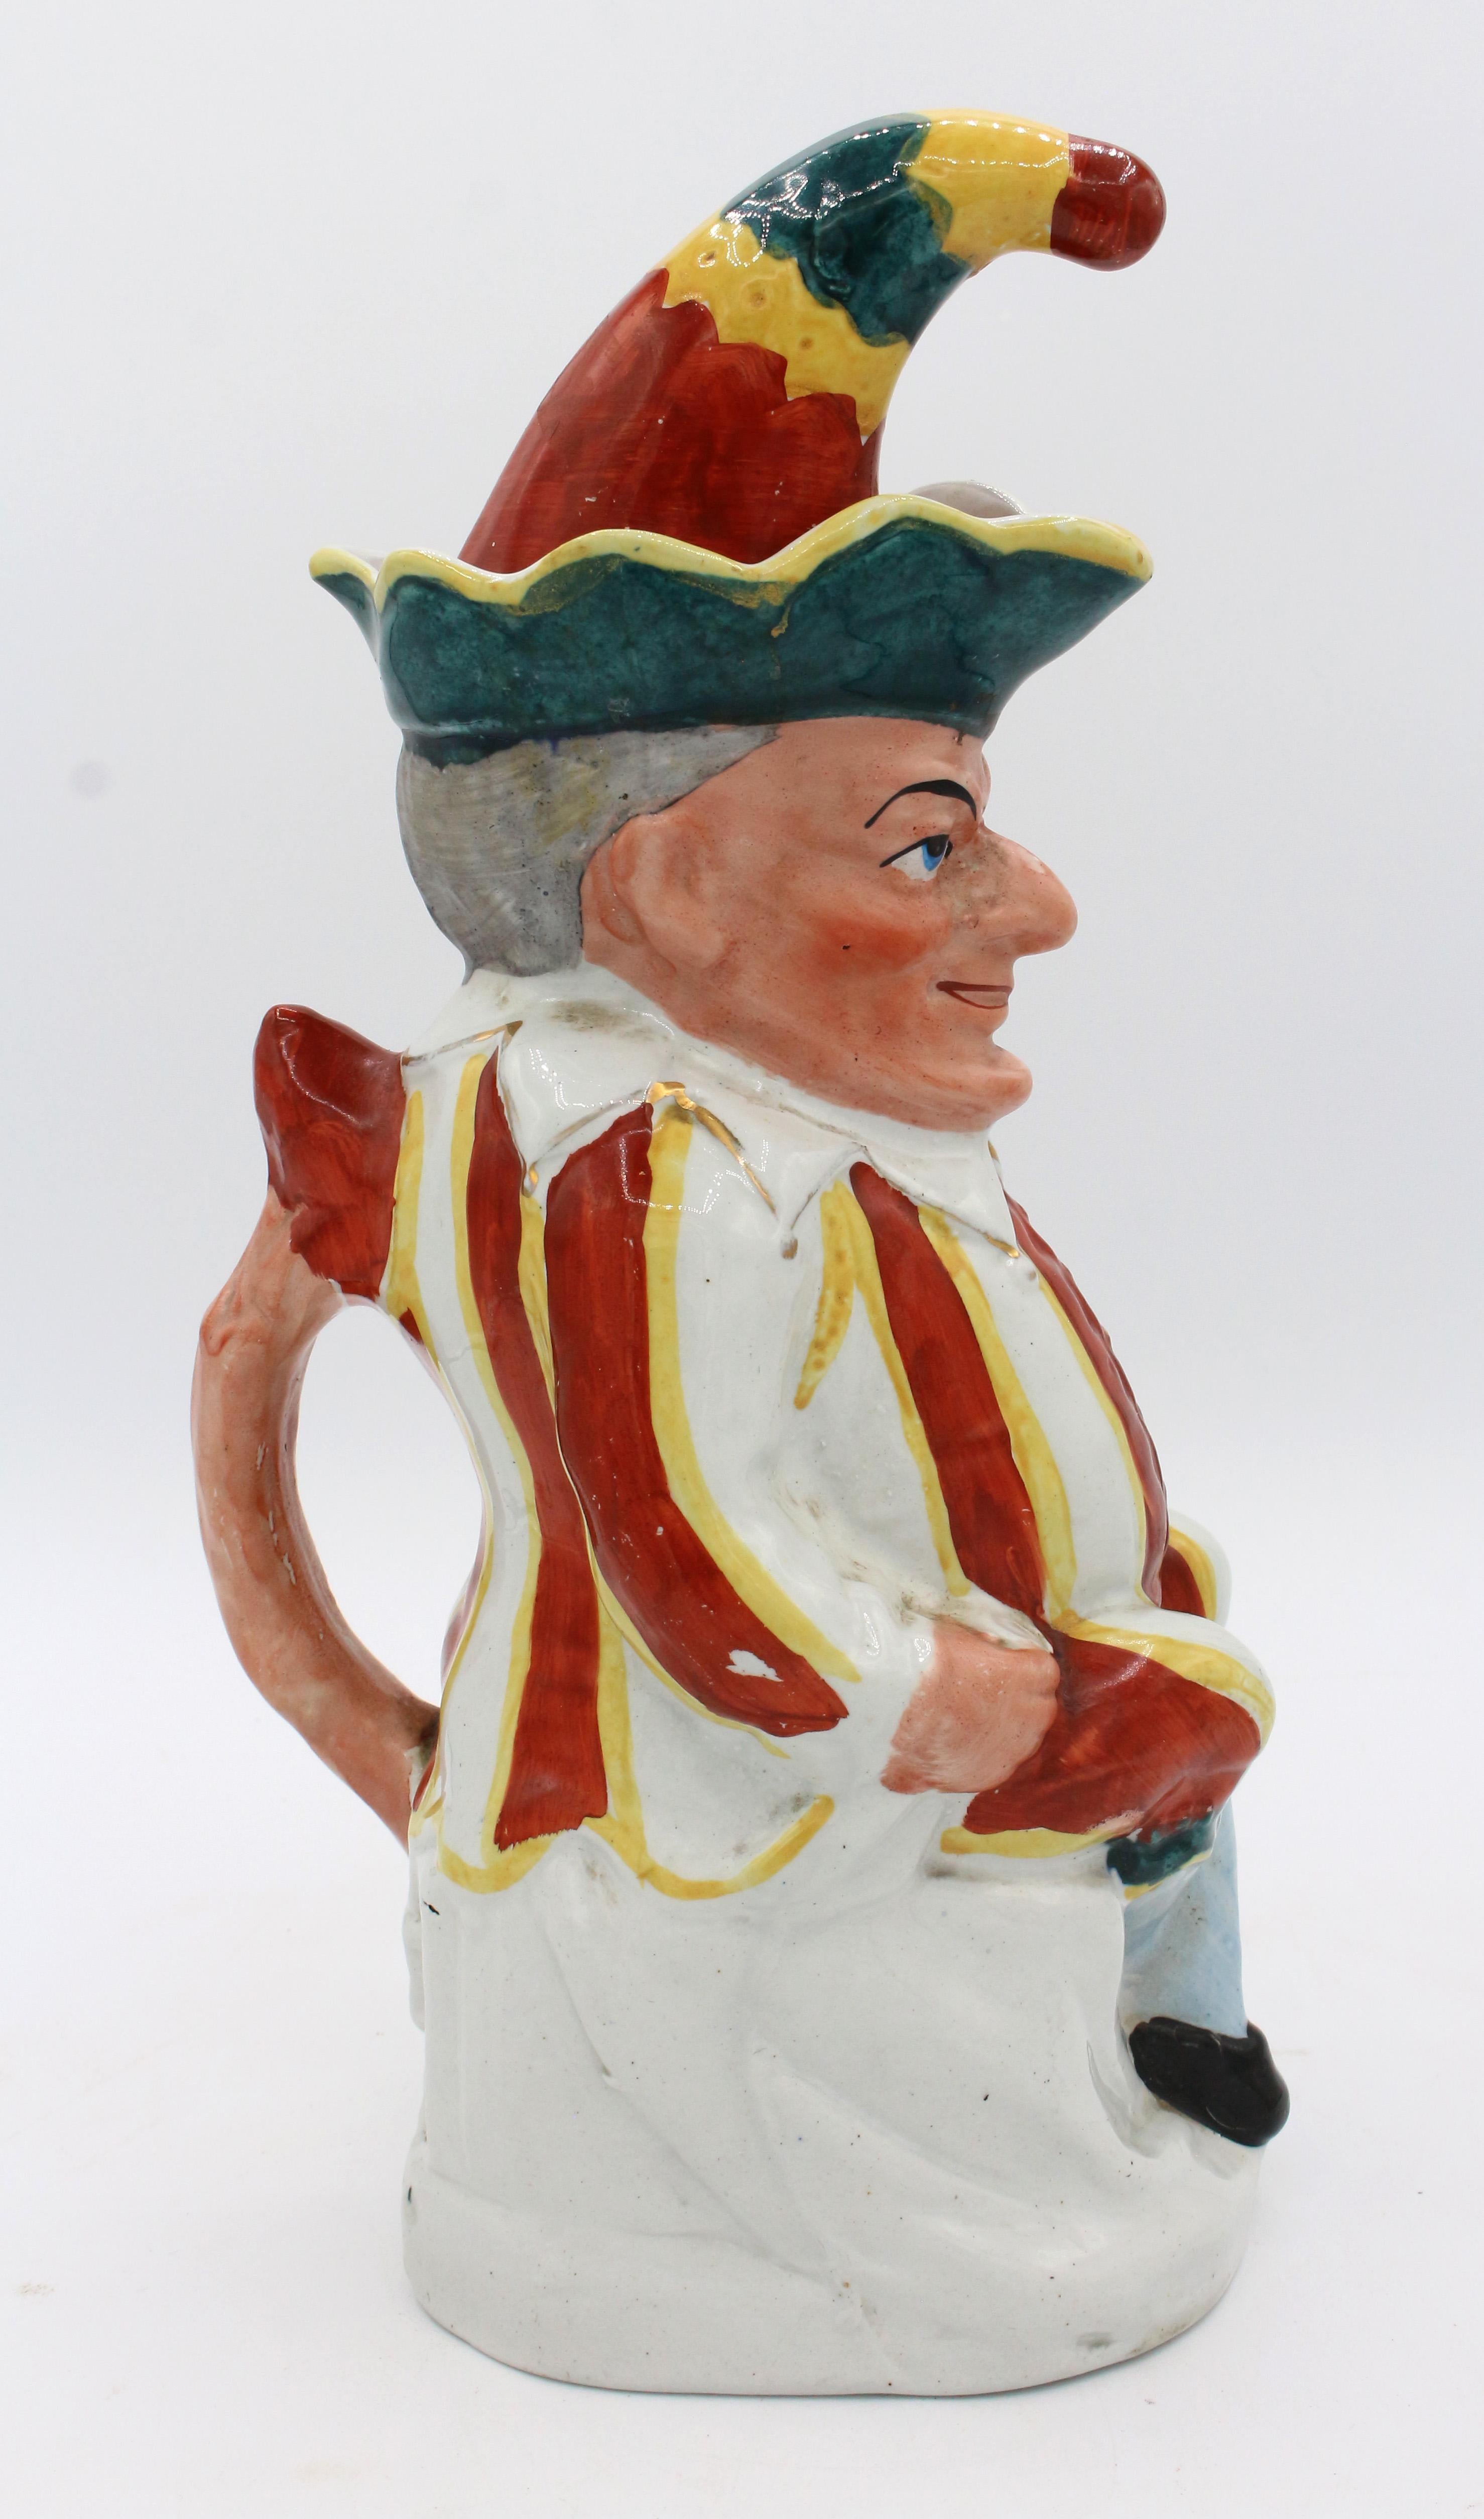 Hilarious Punch figure Toby Jug by William Machin, England, 1889-1910 In Good Condition For Sale In Chapel Hill, NC